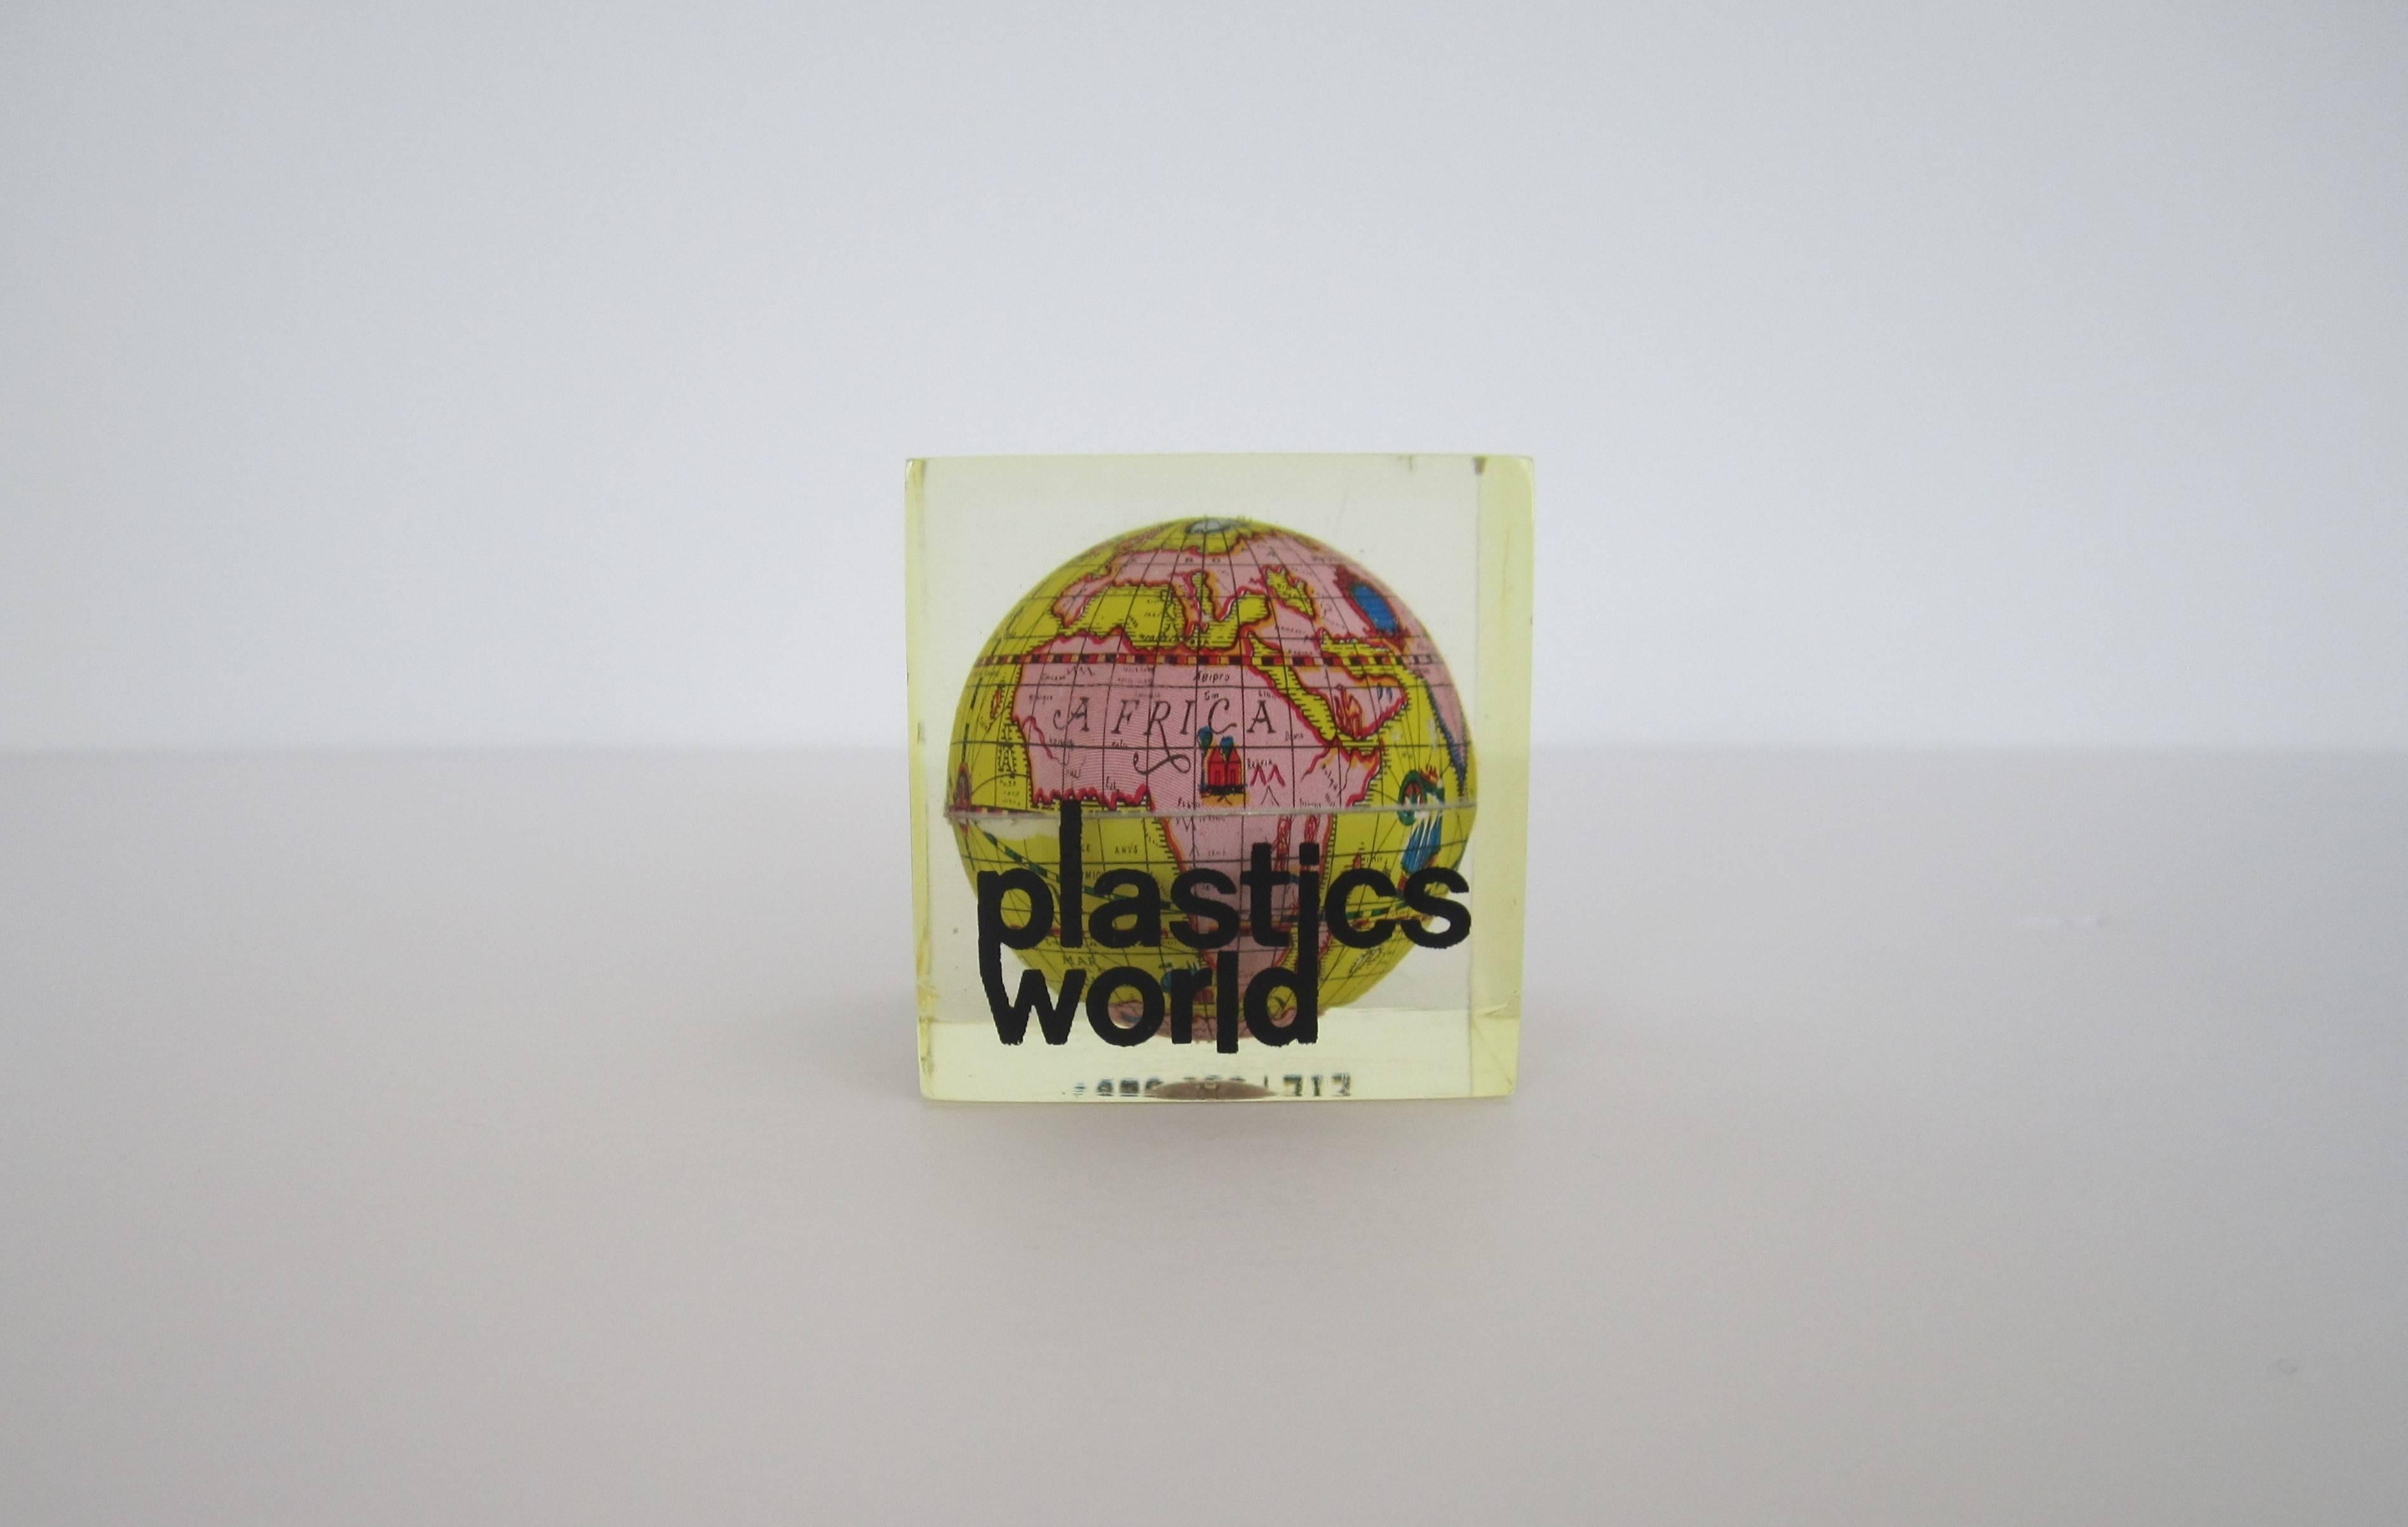 A vintage world globe encased in Lucite, ca. 1970s Modern. 
About address on cube: 205 East 42nd Street, New York, New York, is an Art Deco building in Midtown built in 1927.

Measures 1.75